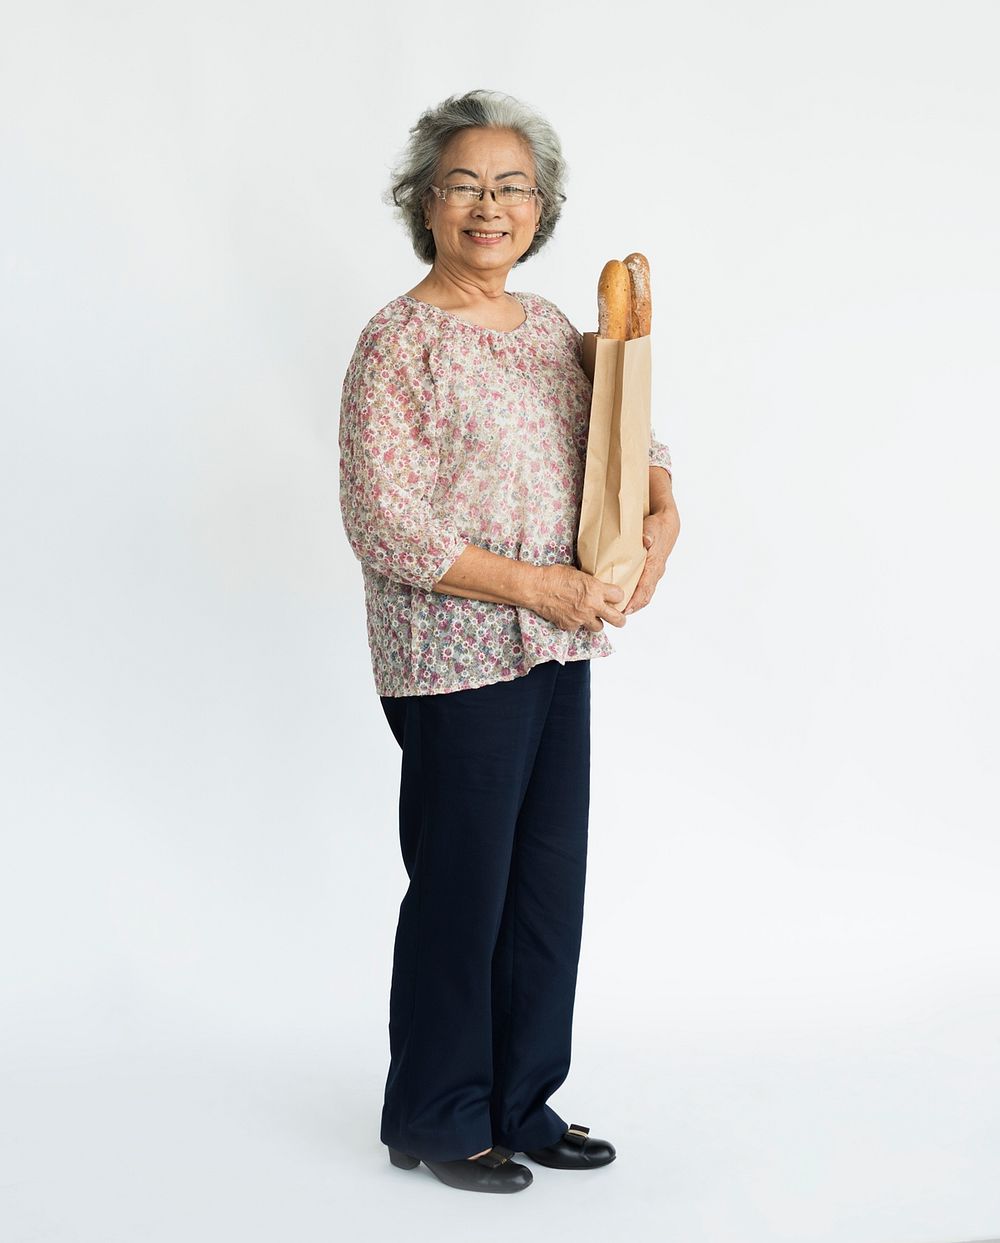 Old lady carrying bread shopping bag